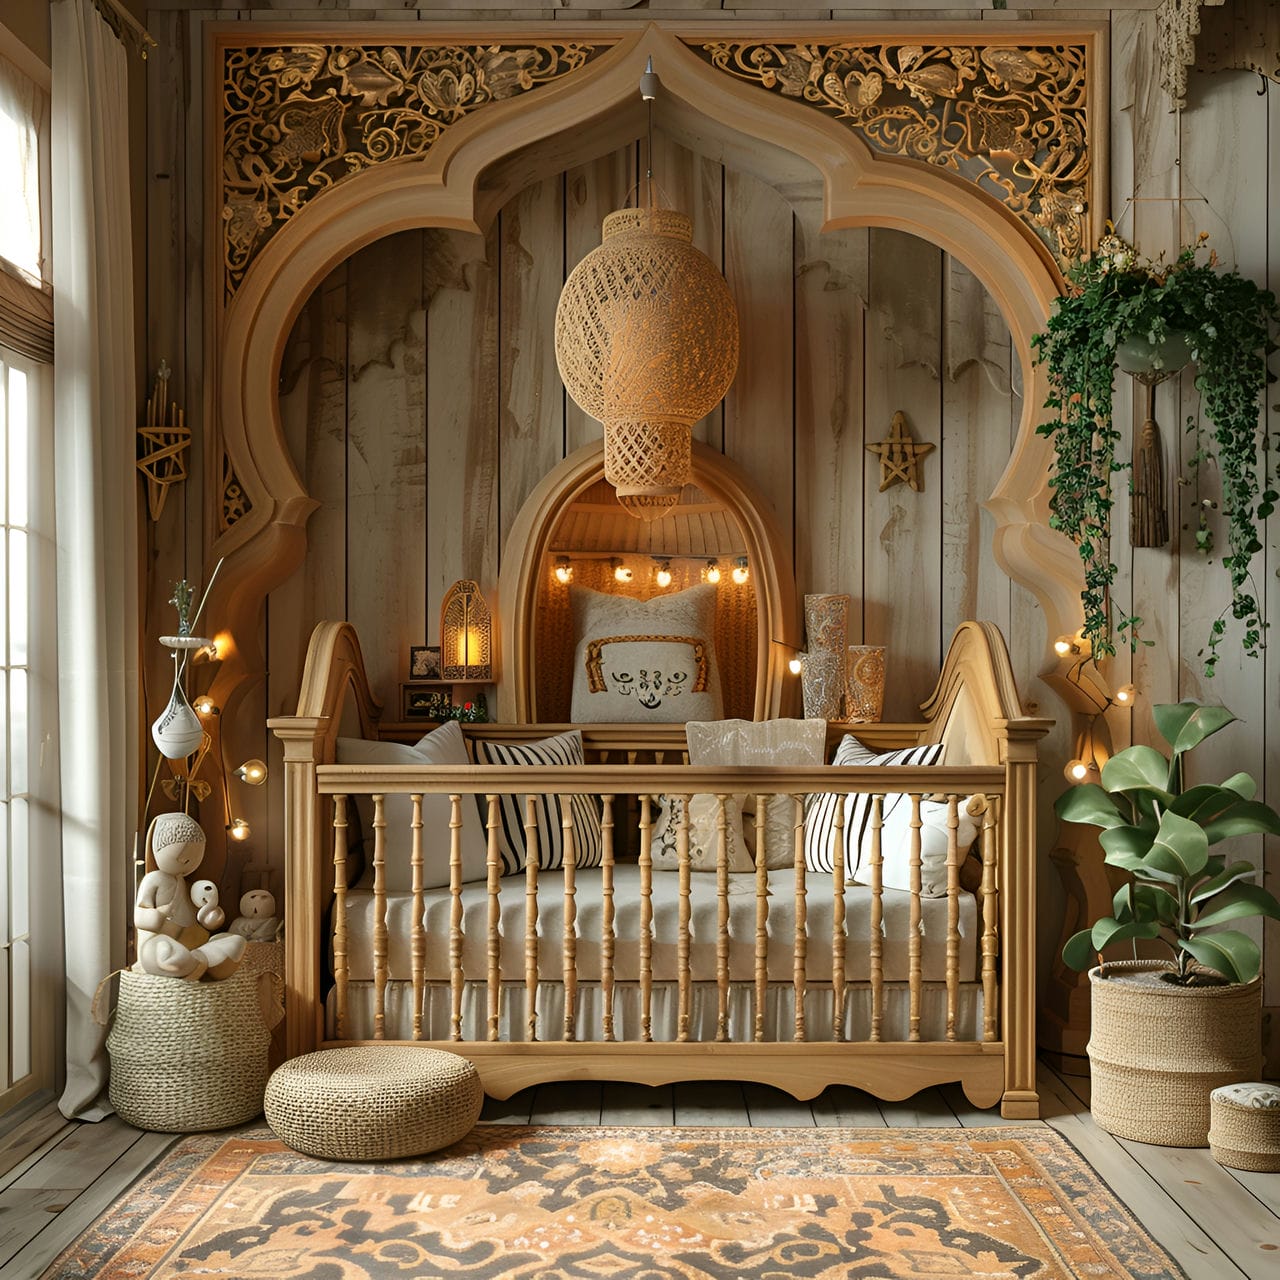 Nursery: size, functionality, uses, furniture and renovation